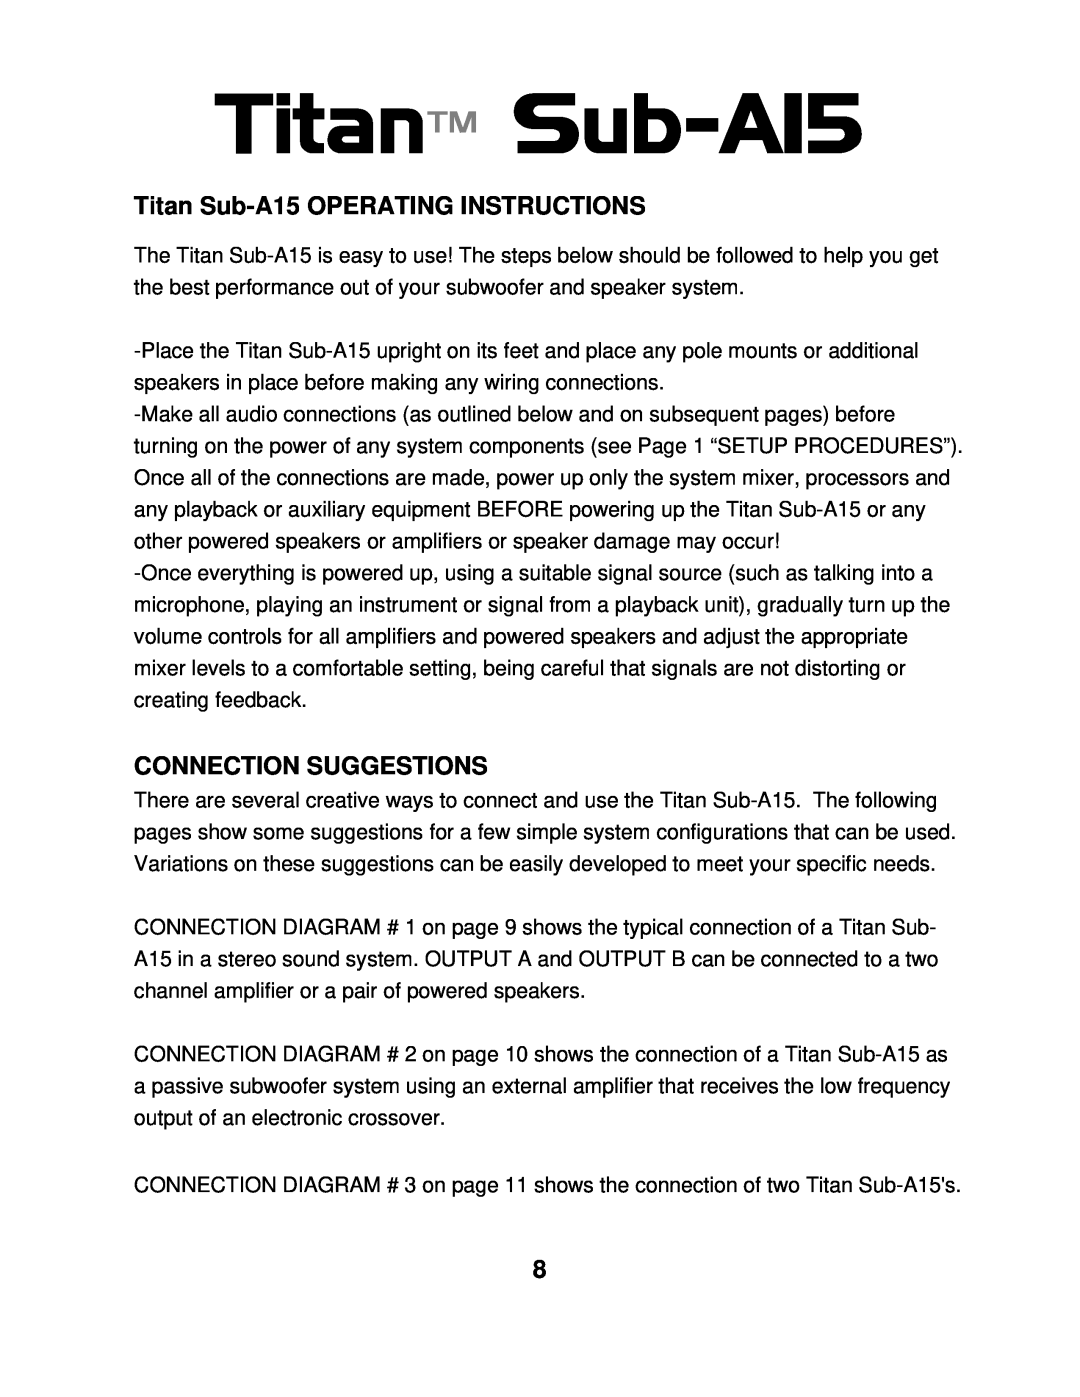 Wharfedale Sub A15 manual Titan Sub-A15OPERATING INSTRUCTIONS, Connection Suggestions 